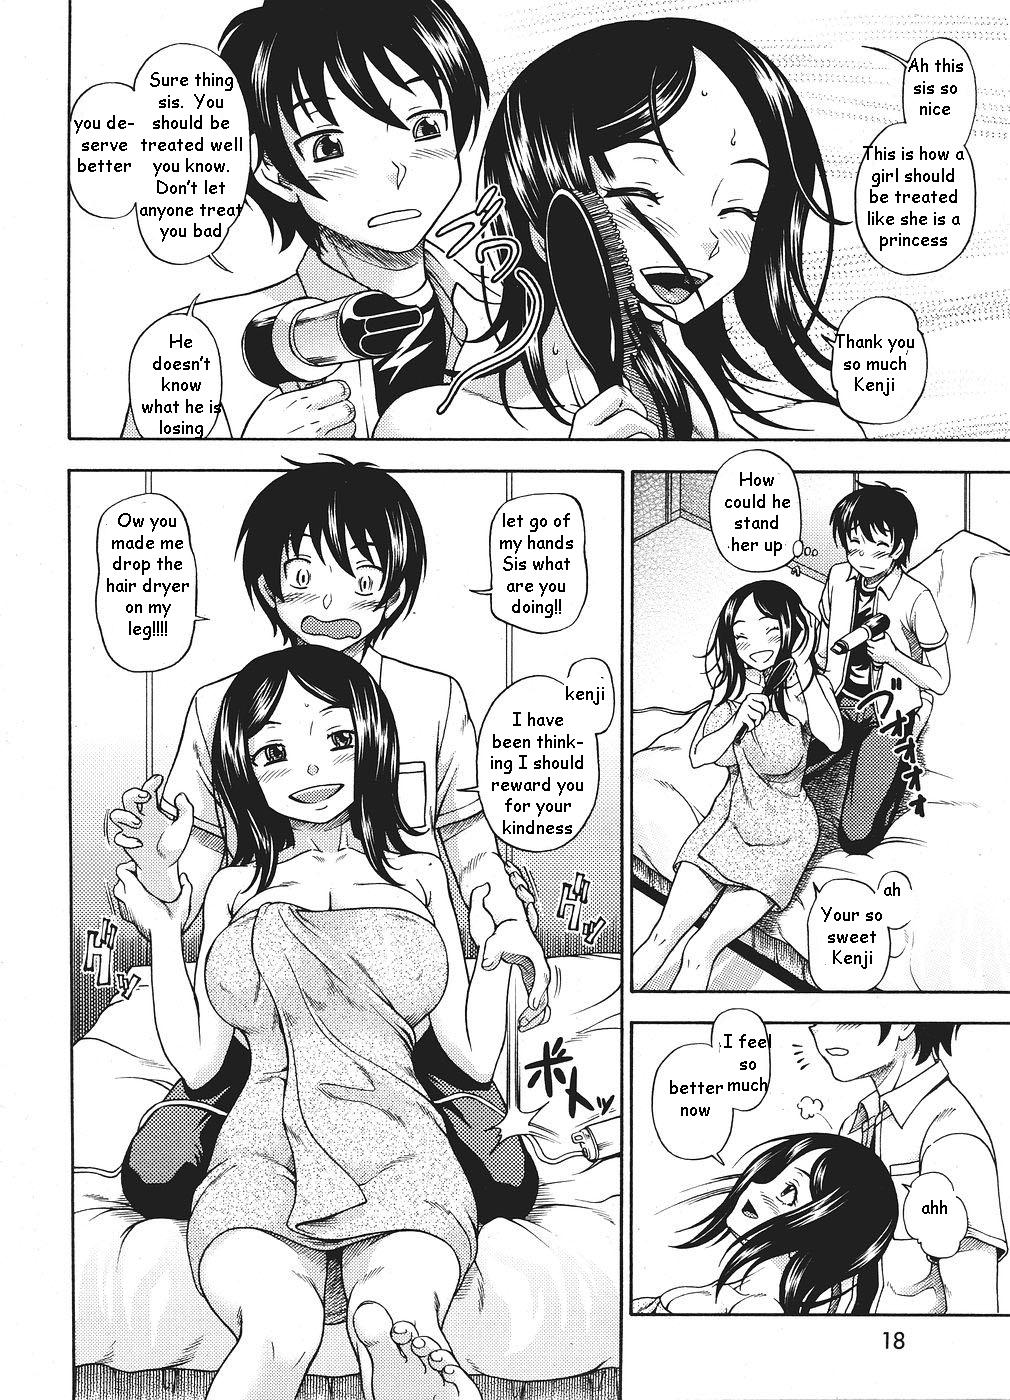 Screaming Sister Rebound Hotel - Page 4